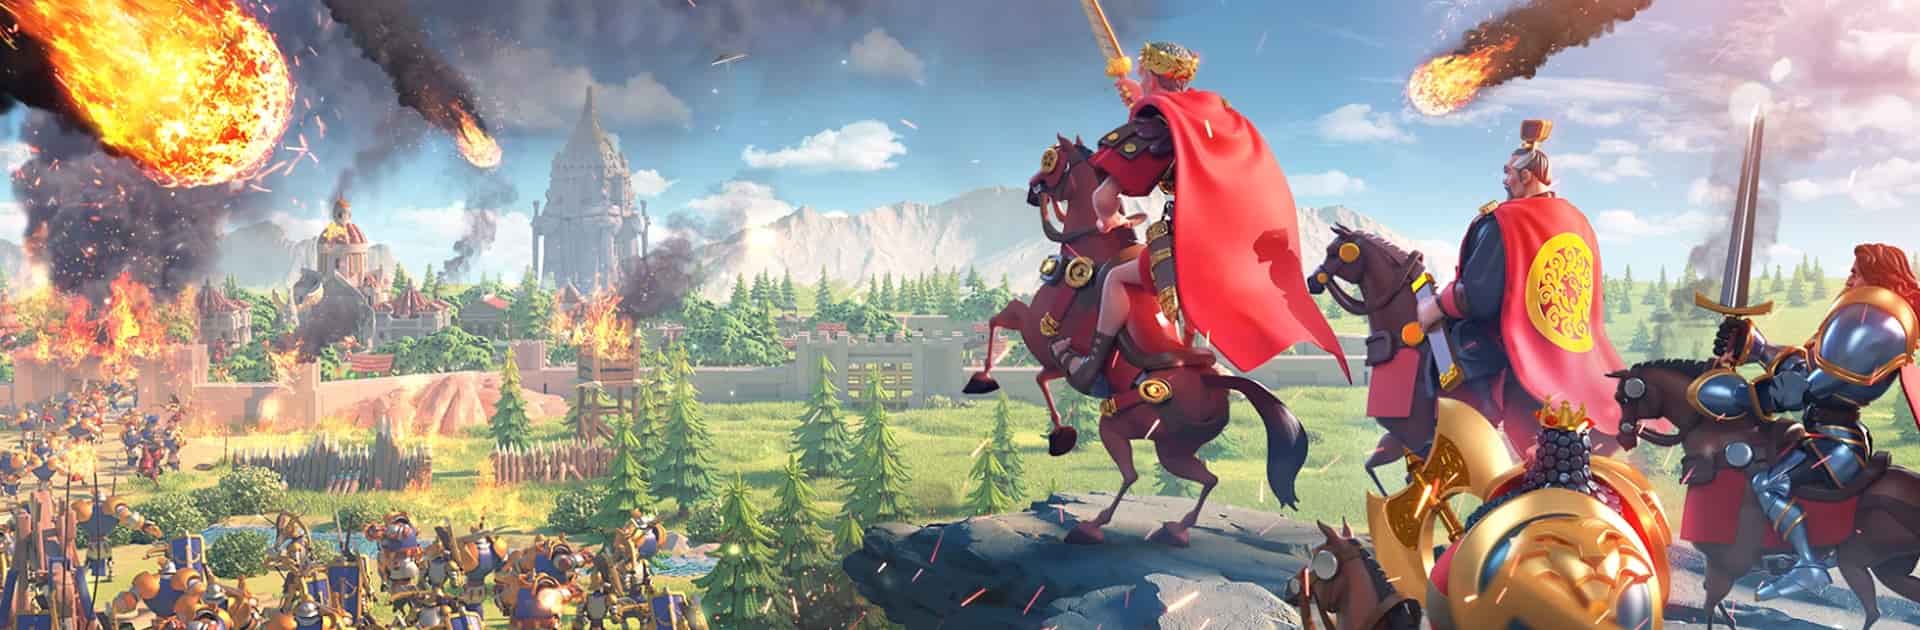 rise of kingdoms for pc